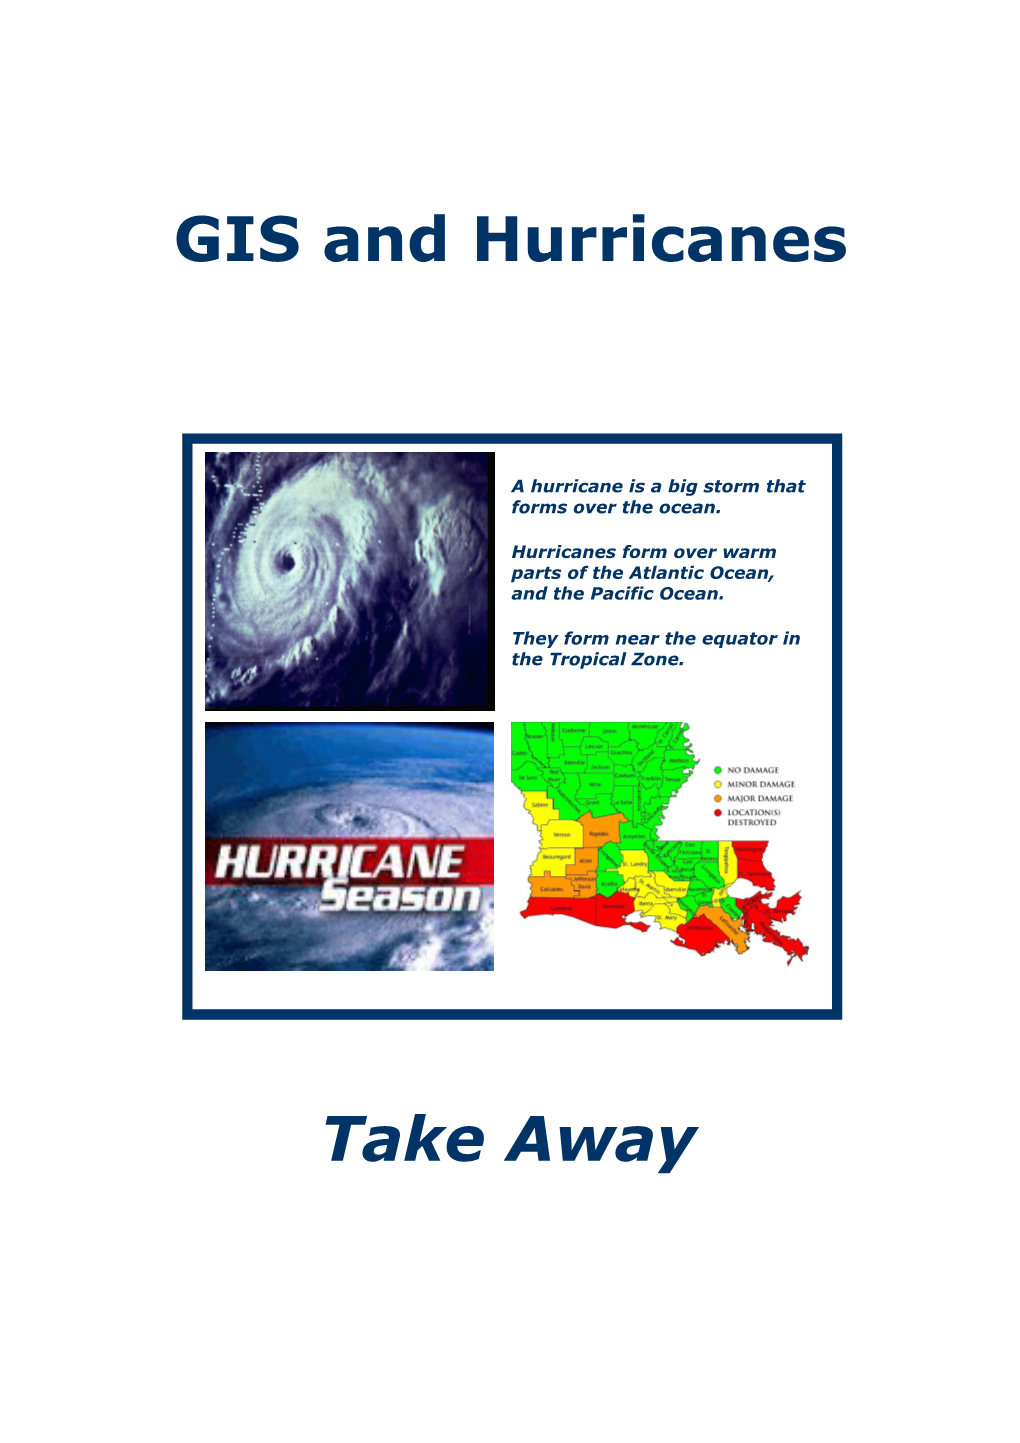 Seealso the ESRI Education Document on Hurricanes and the Arcexplorer Document